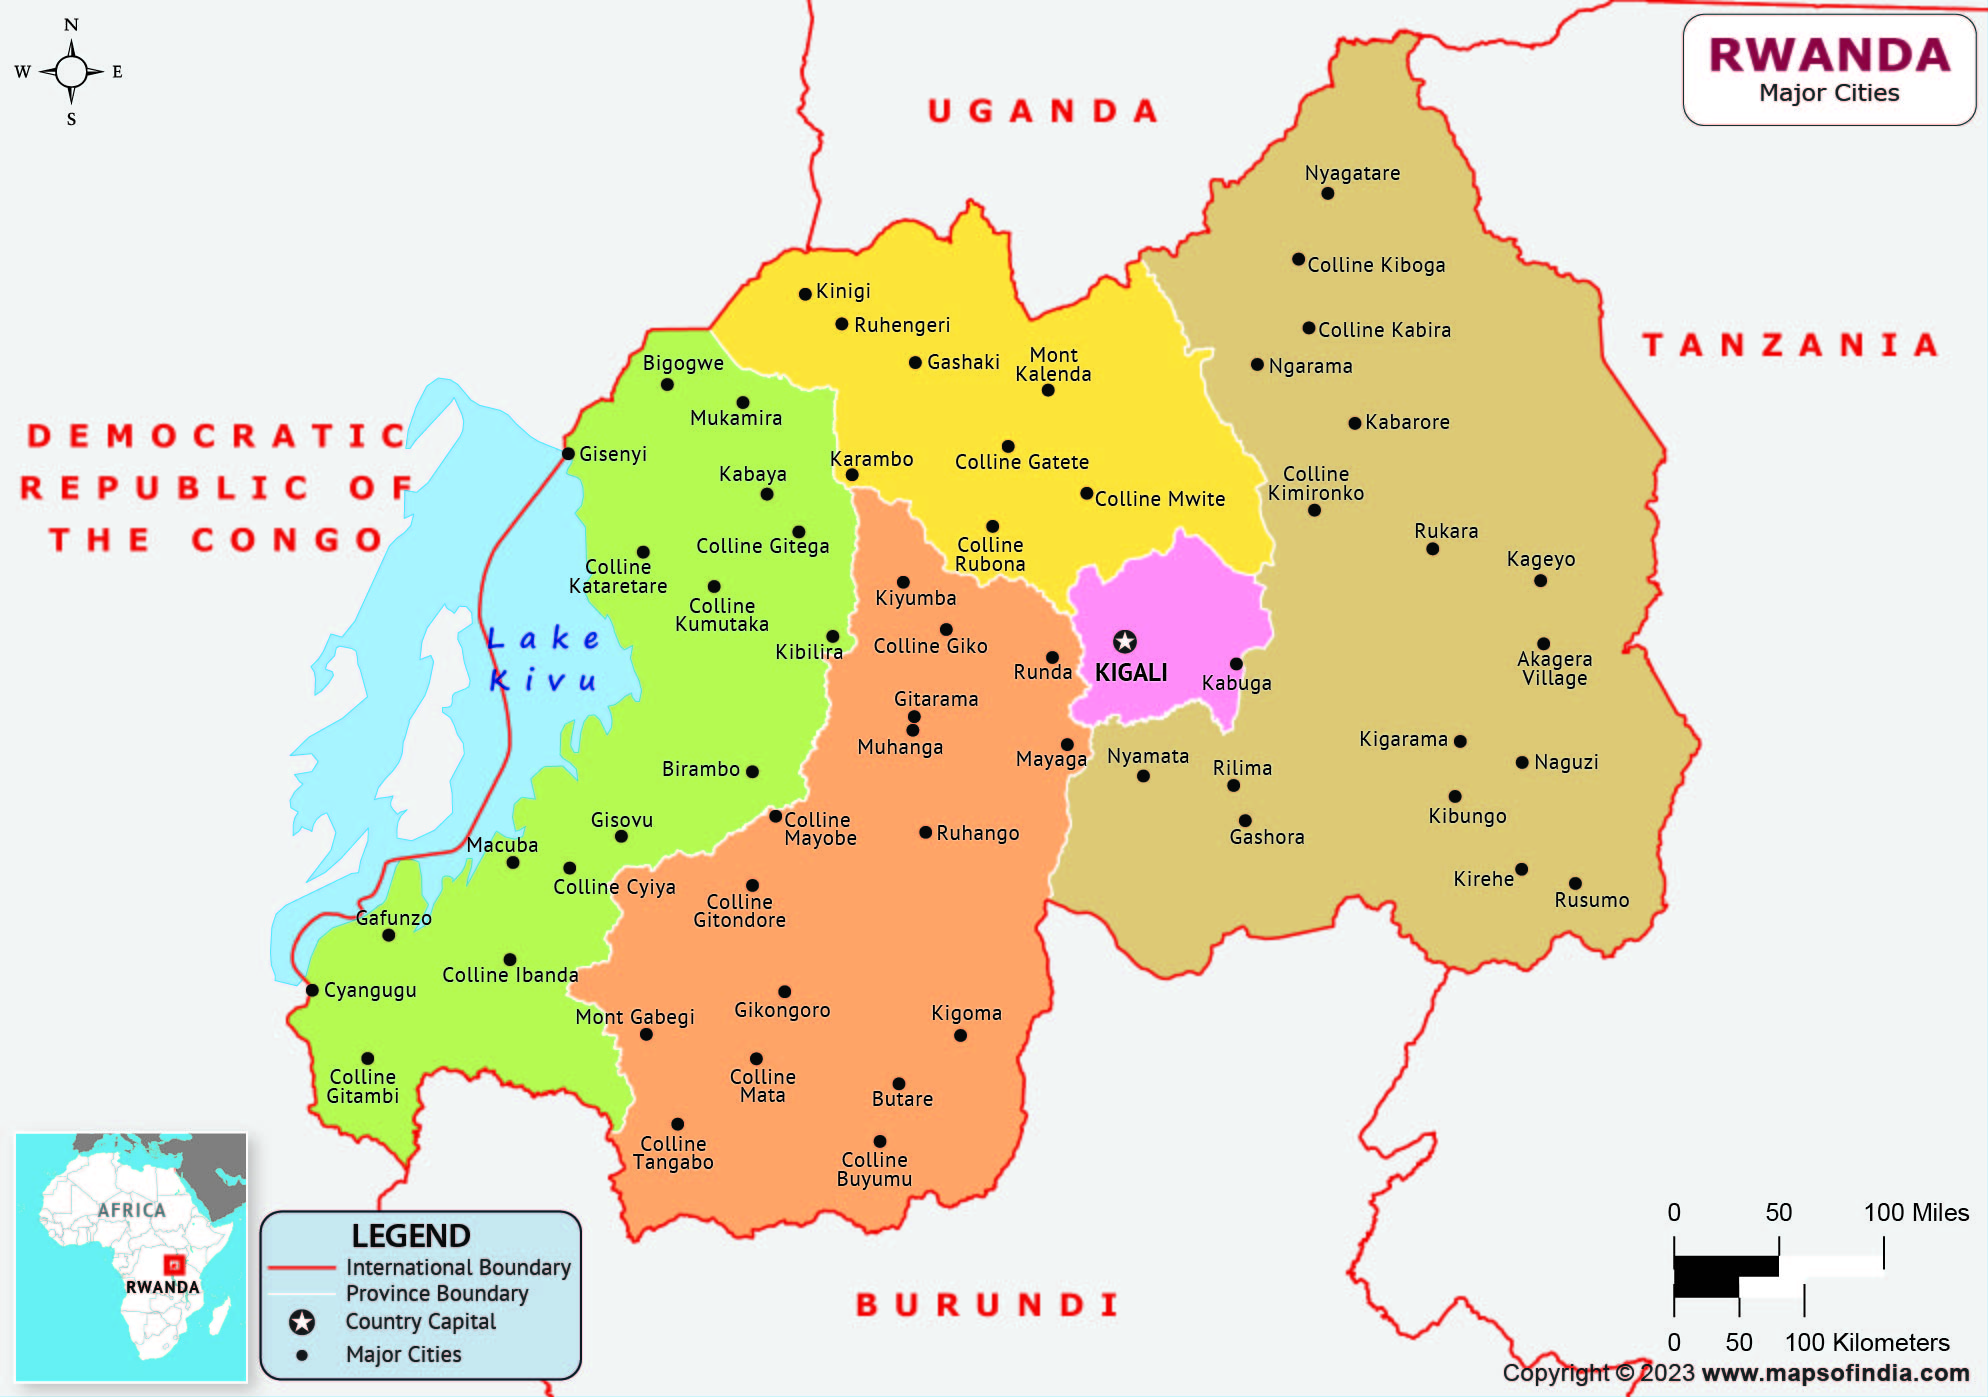 Rwanda Major Cities Map | List of Major Cities in Different States of ...